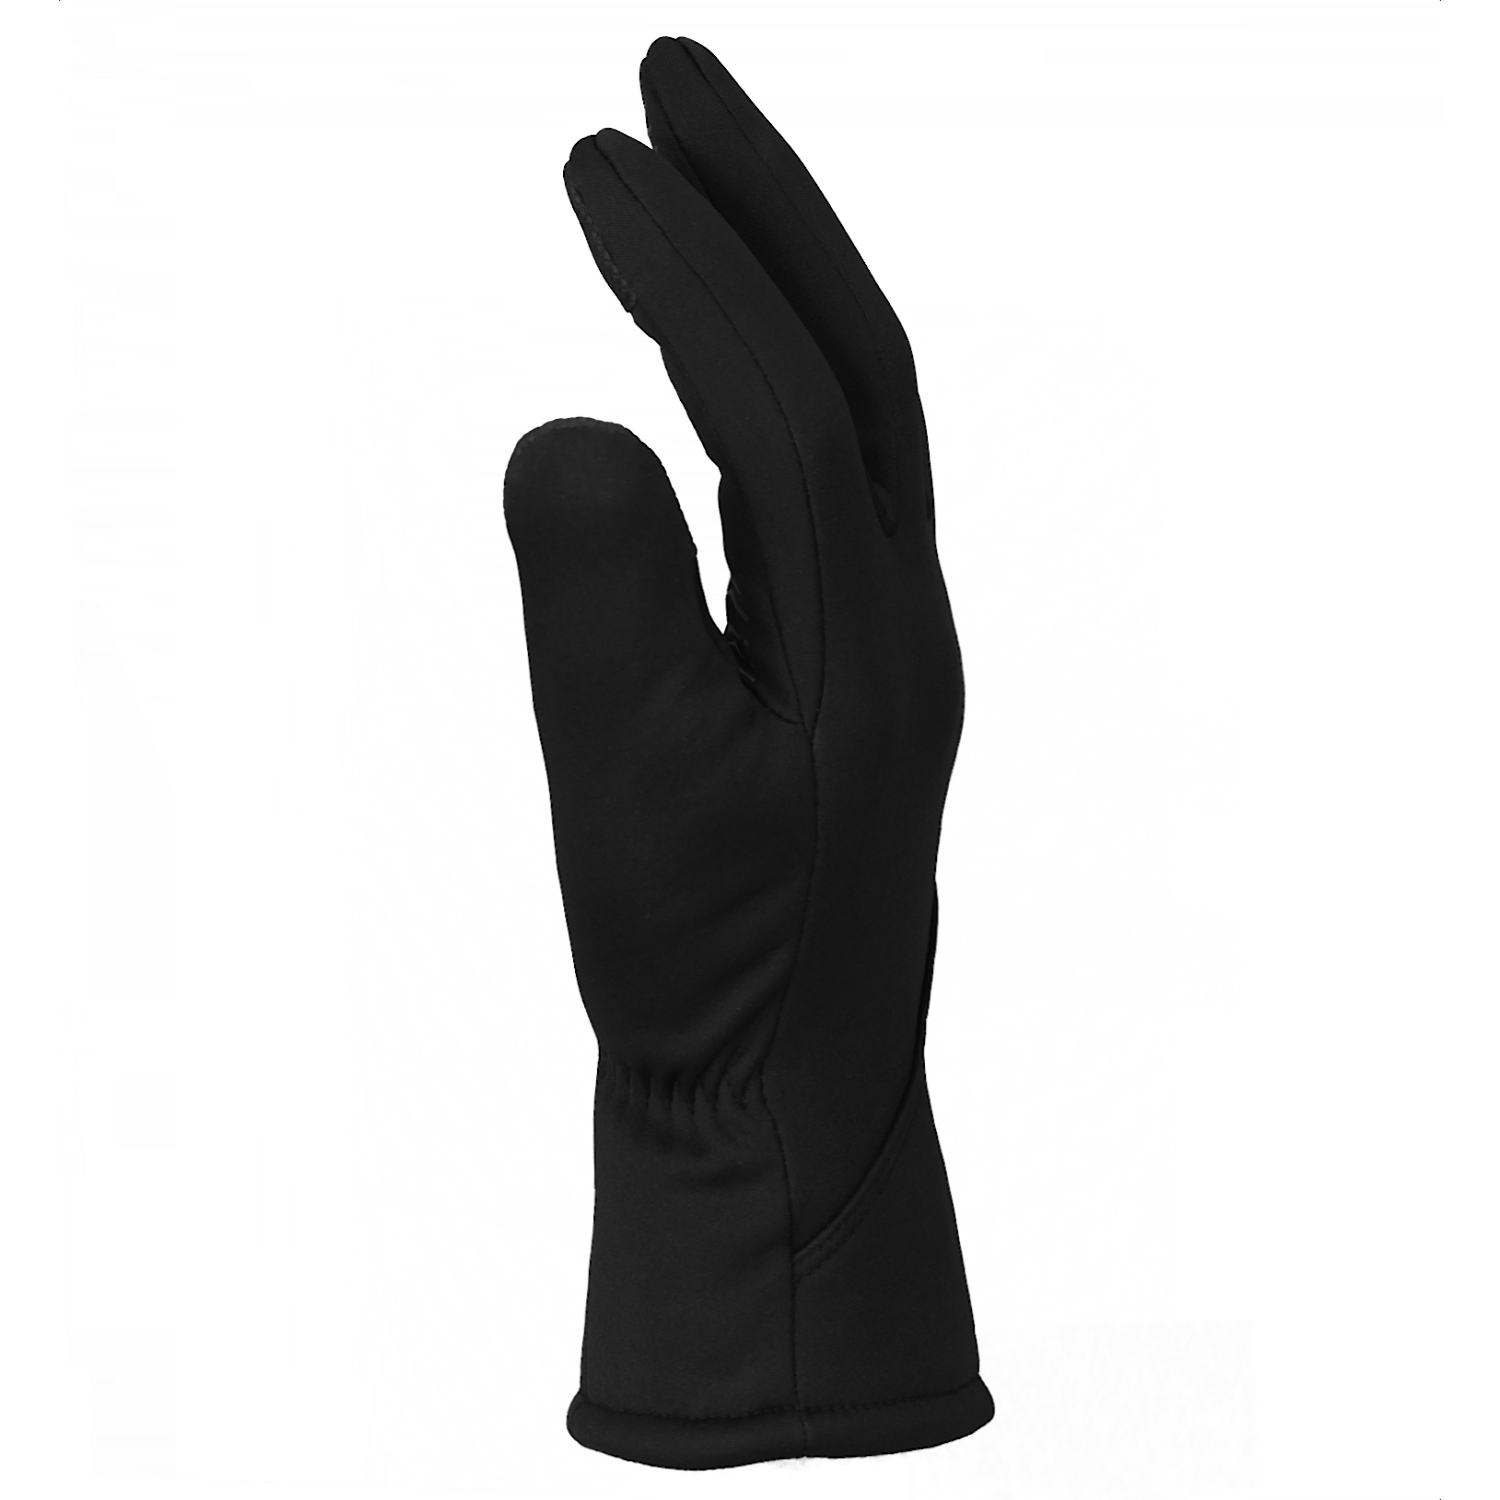 OZERO Winter Gloves for Men Women - Touchscreen Waterproof Anti-Slip  Thermal Glove Warm Gifts for Driving Cycling Snow Skiing 